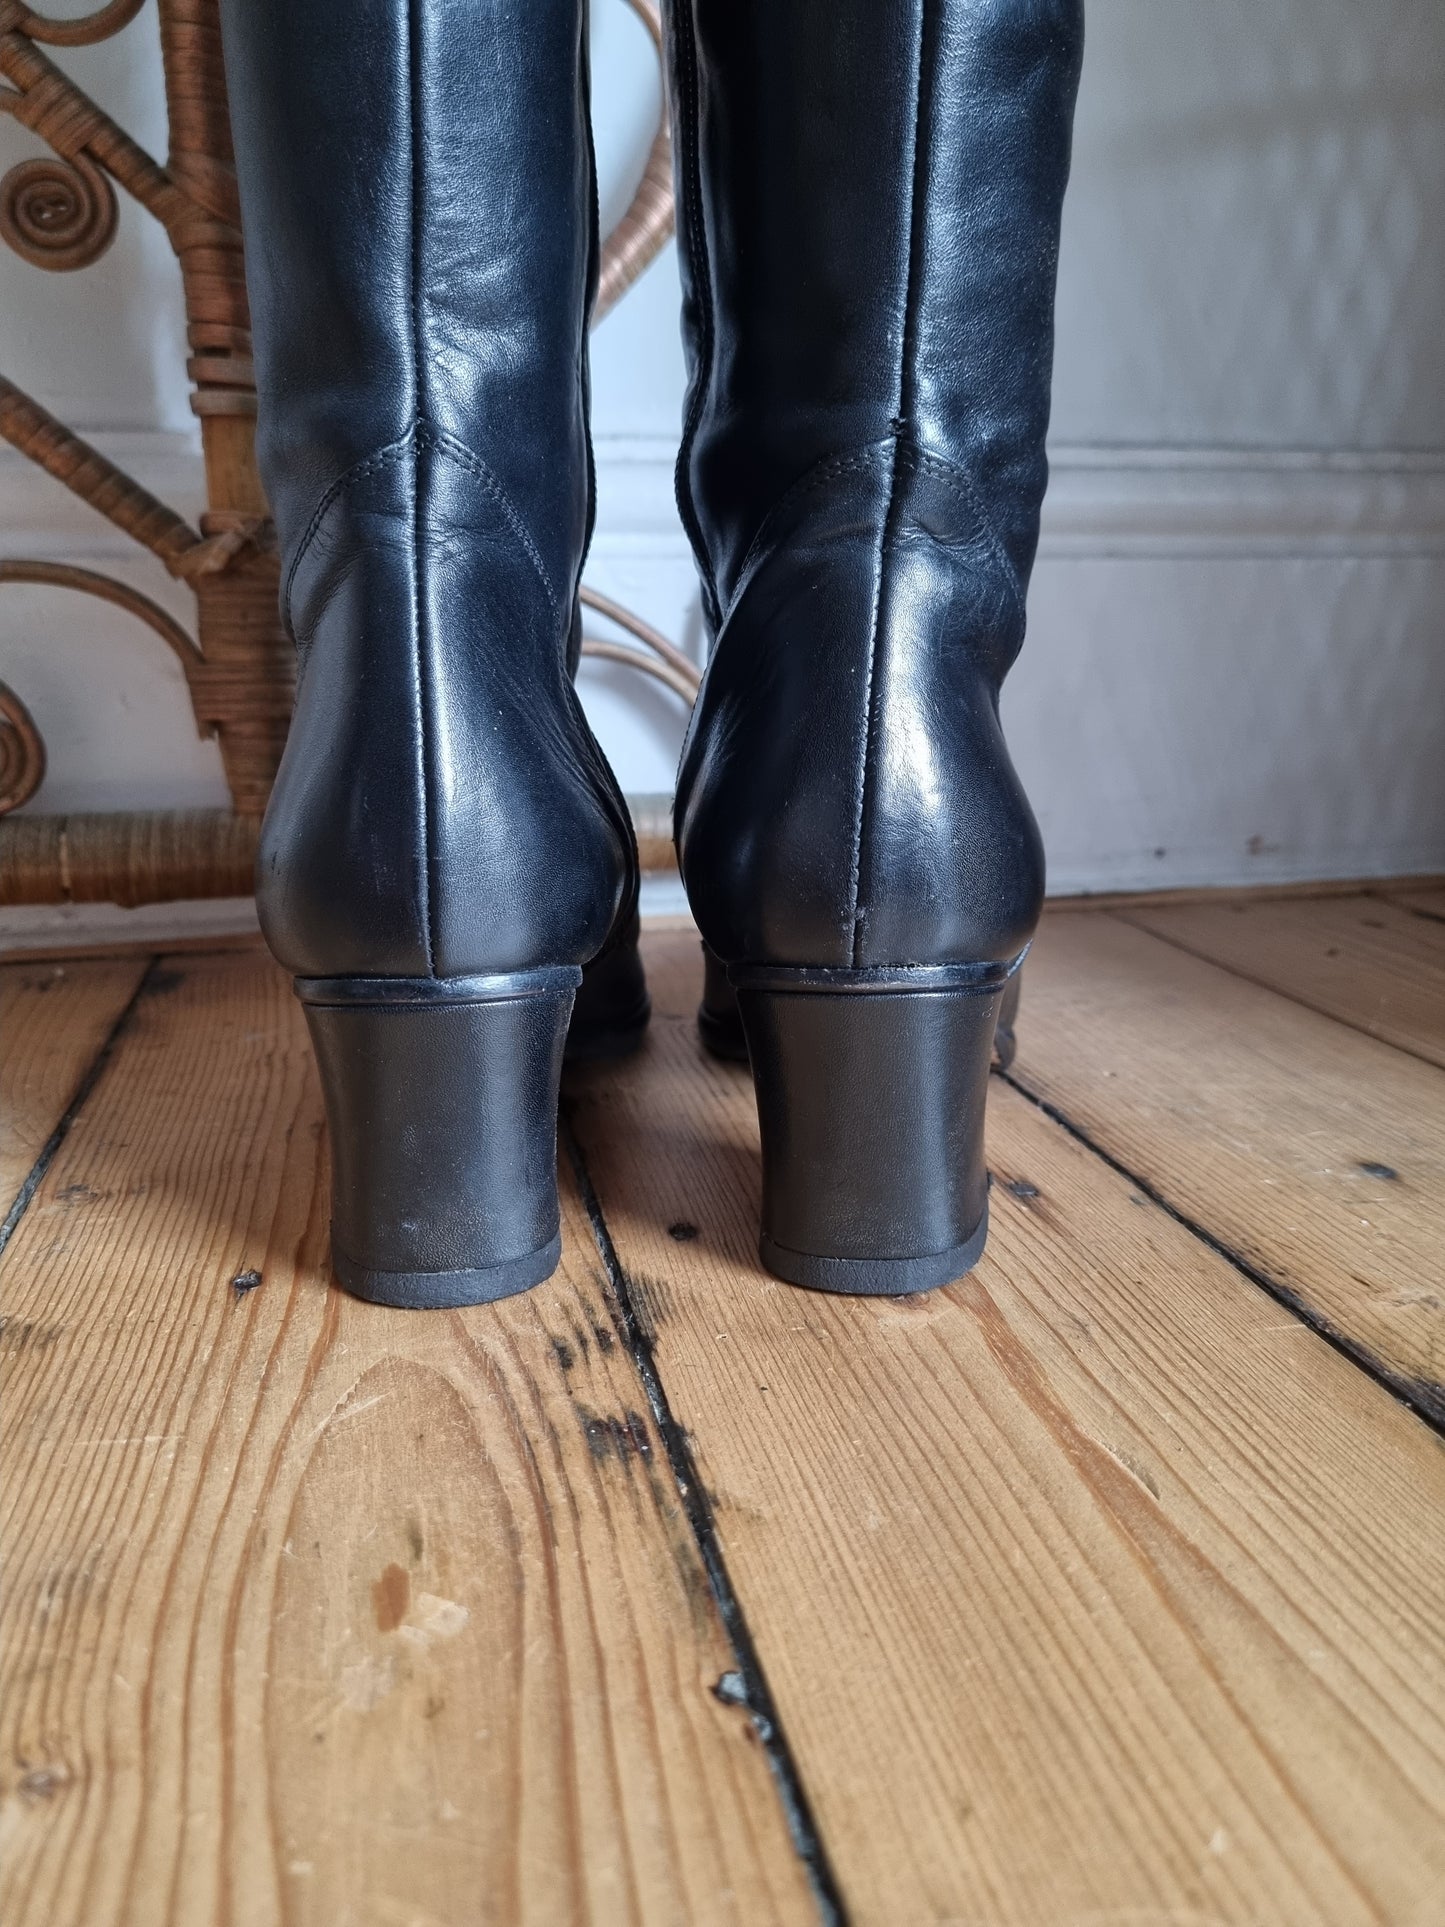 Vintage black Bally over the knee leather boots uk size 4 4.5 Eur 37 37.5 us 6 6.5